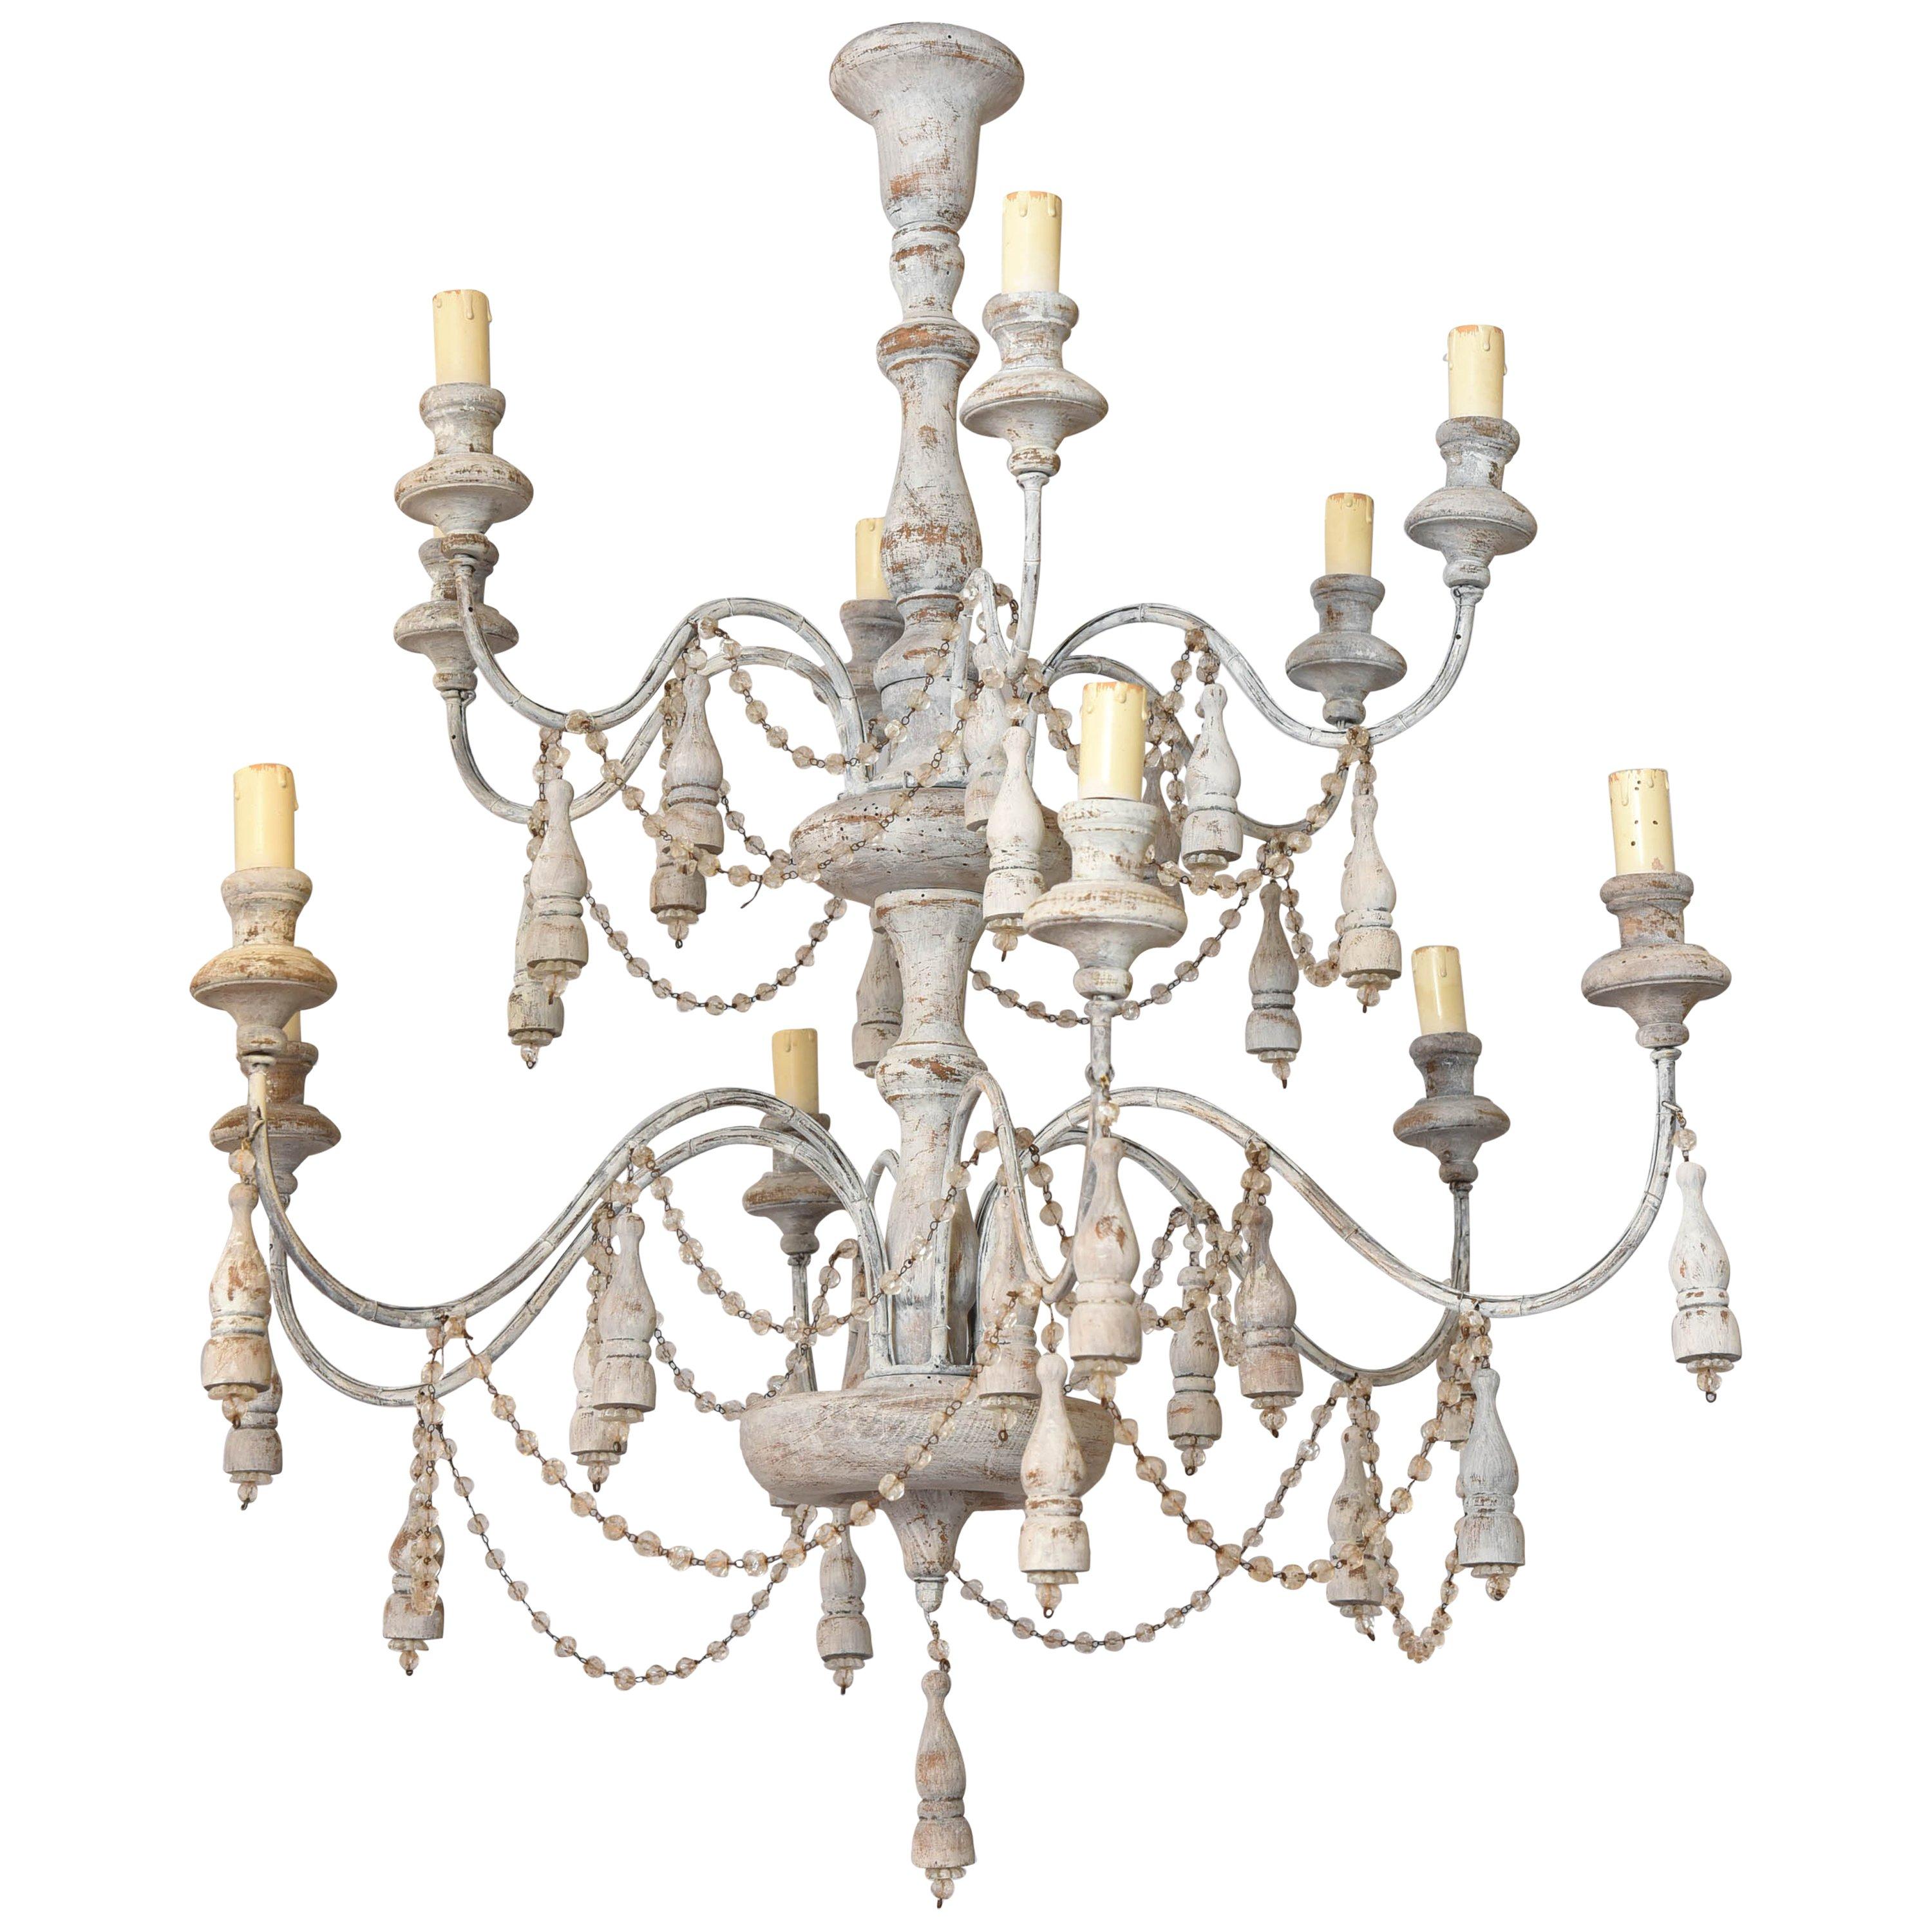 Italian Two-Tier Chandelier Strung with Beads and Tassels